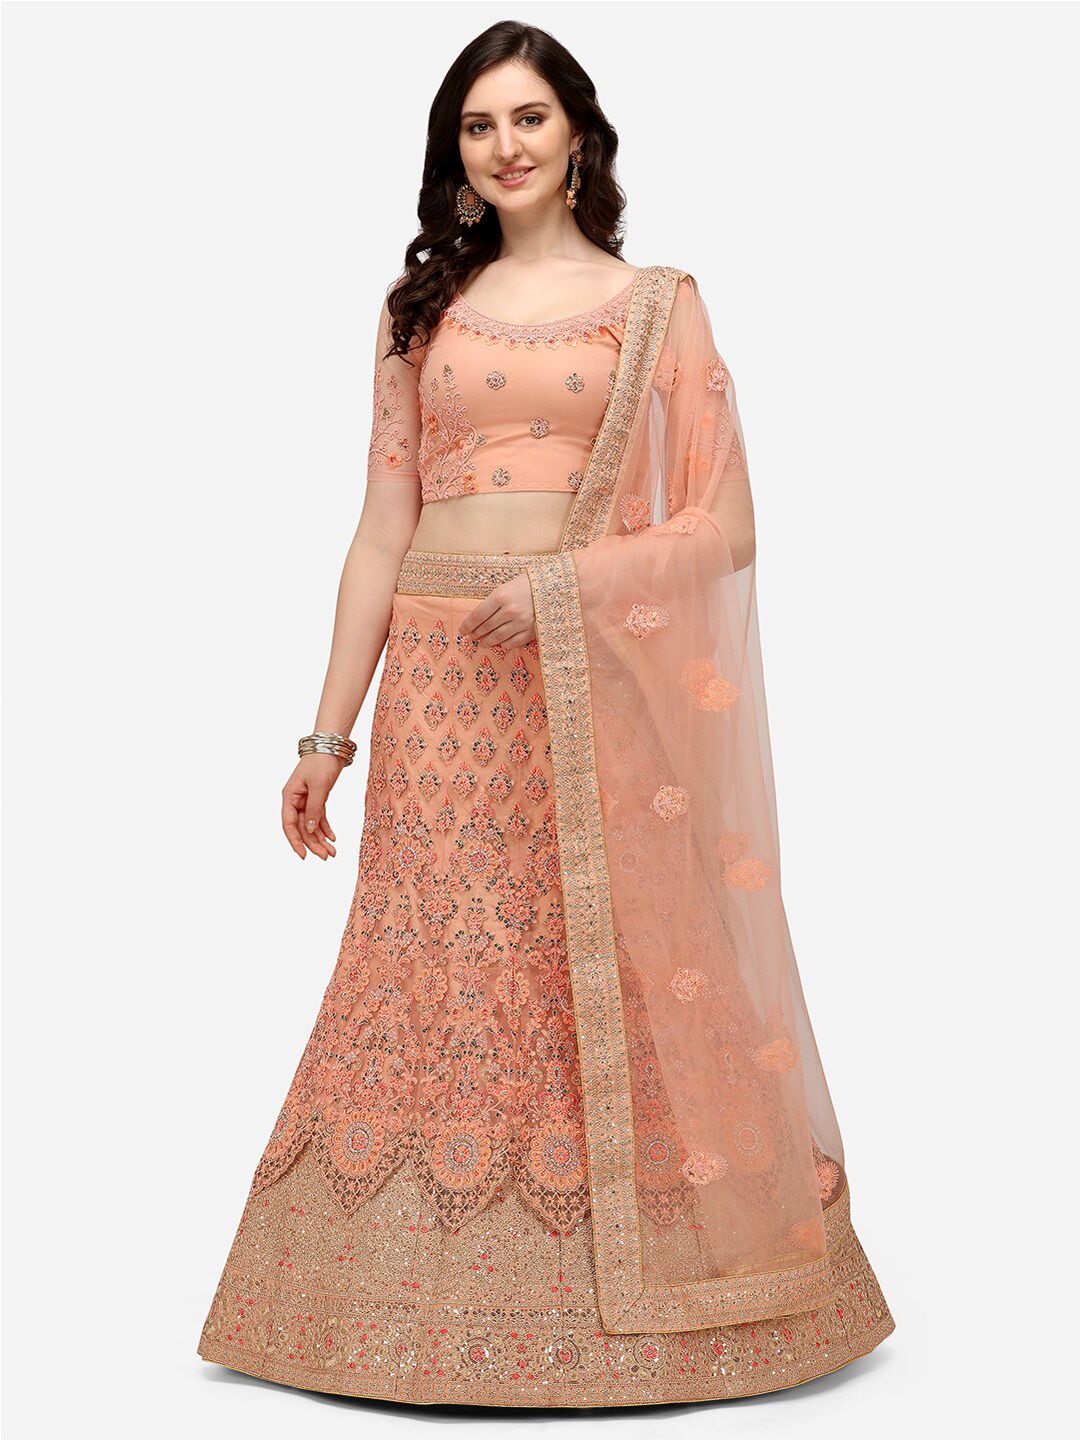 VRSALES Peach-Coloured Embroidered Semi-Stitched Lehenga & Unstitched Blouse With Dupatta Price in India